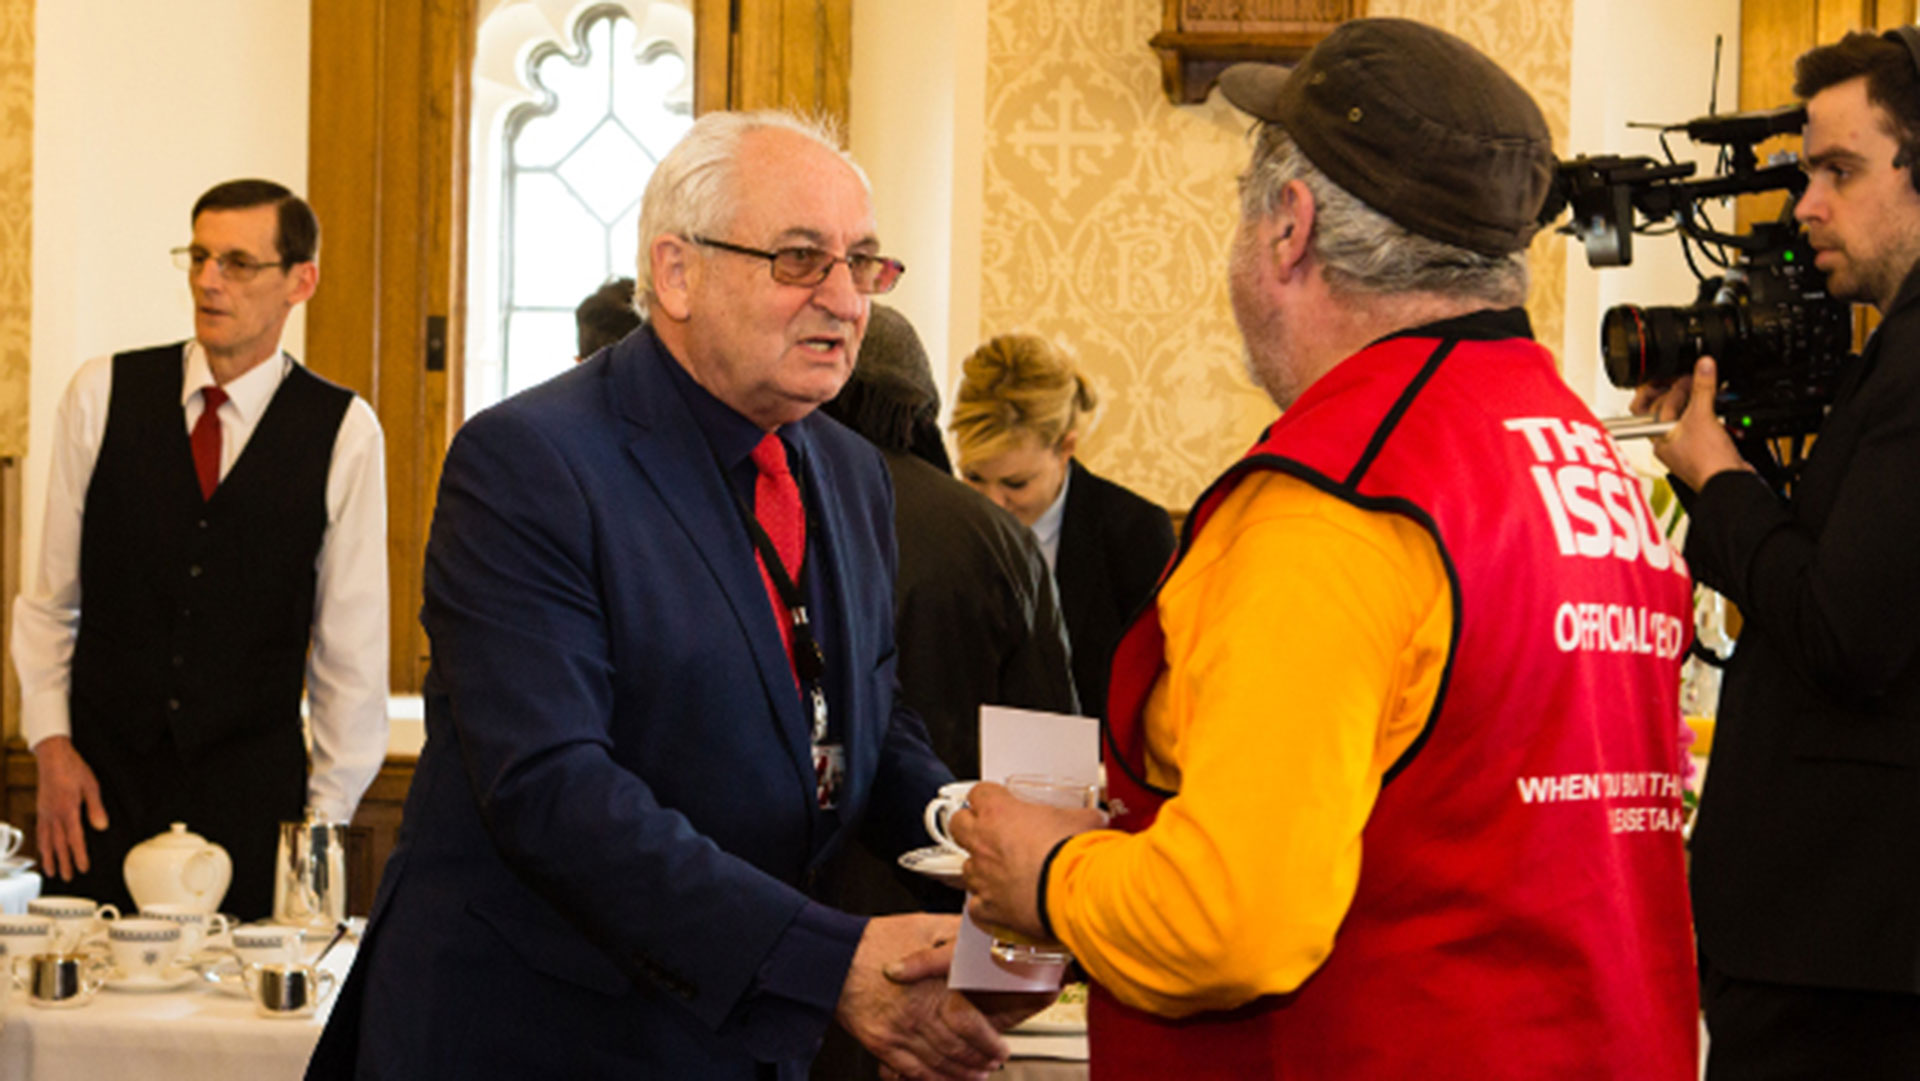 John Bird and vendor at the House of Lords